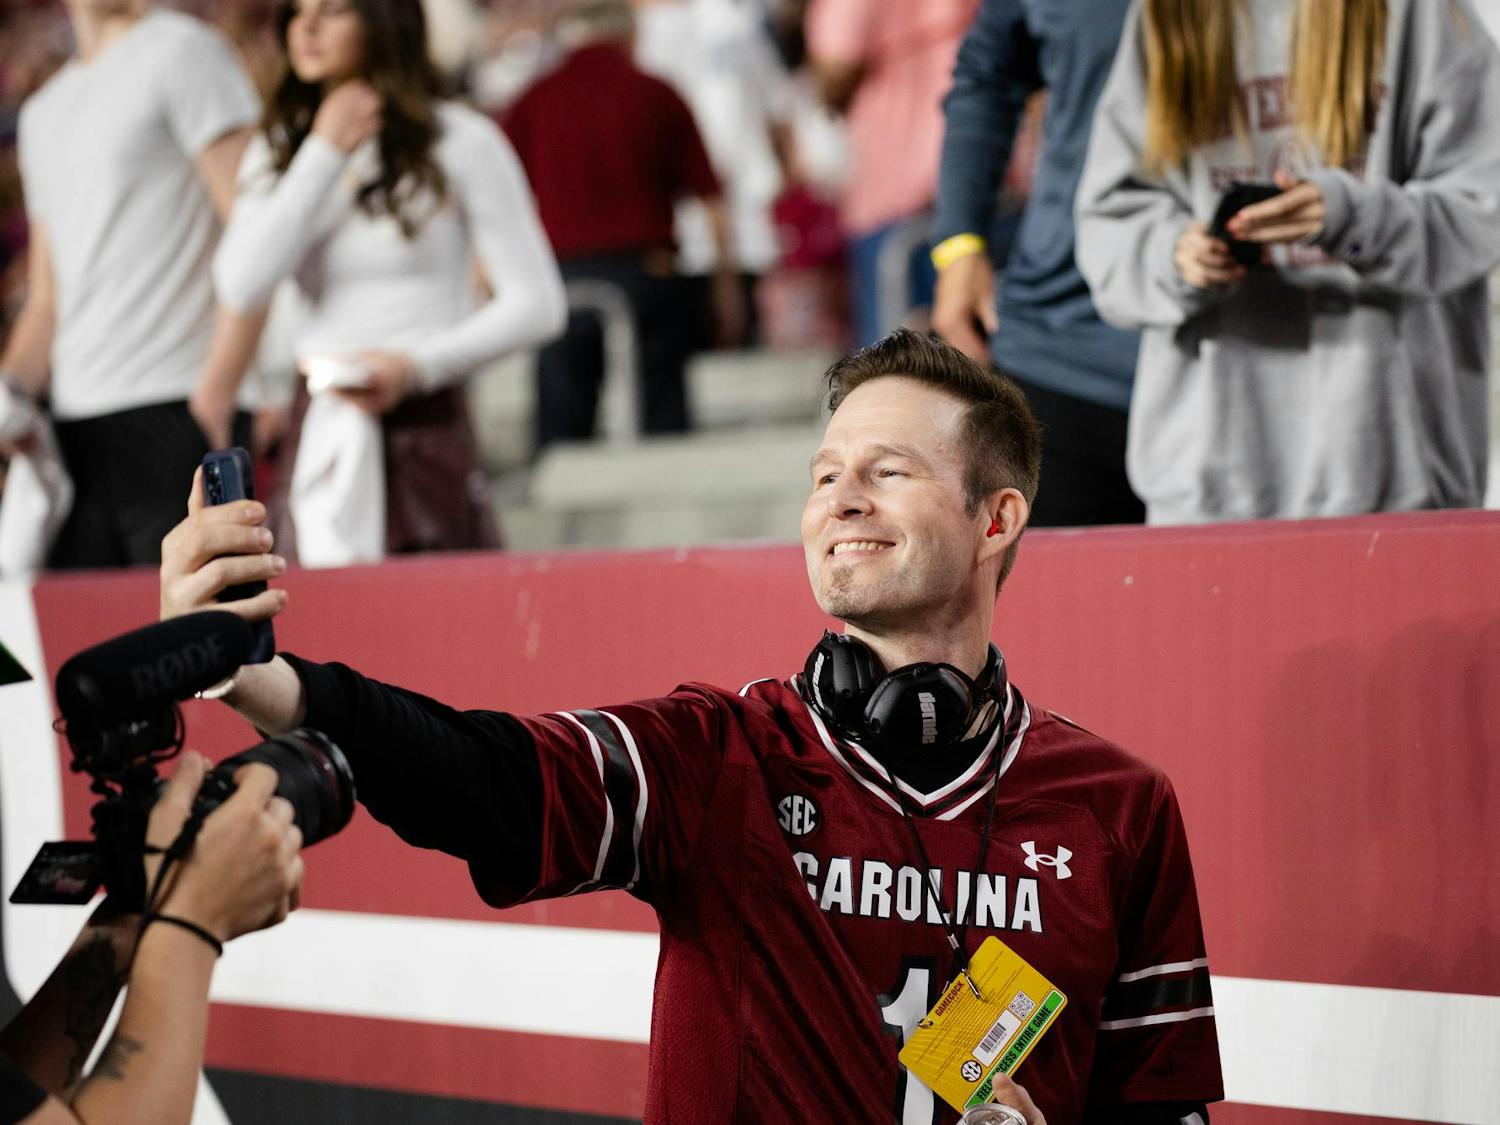 Darude smiles for a picture with a fan while on the sidelines of South Carolina's game against Kentucky. The Gamecocks went on to beat the Wildcats 17-14.